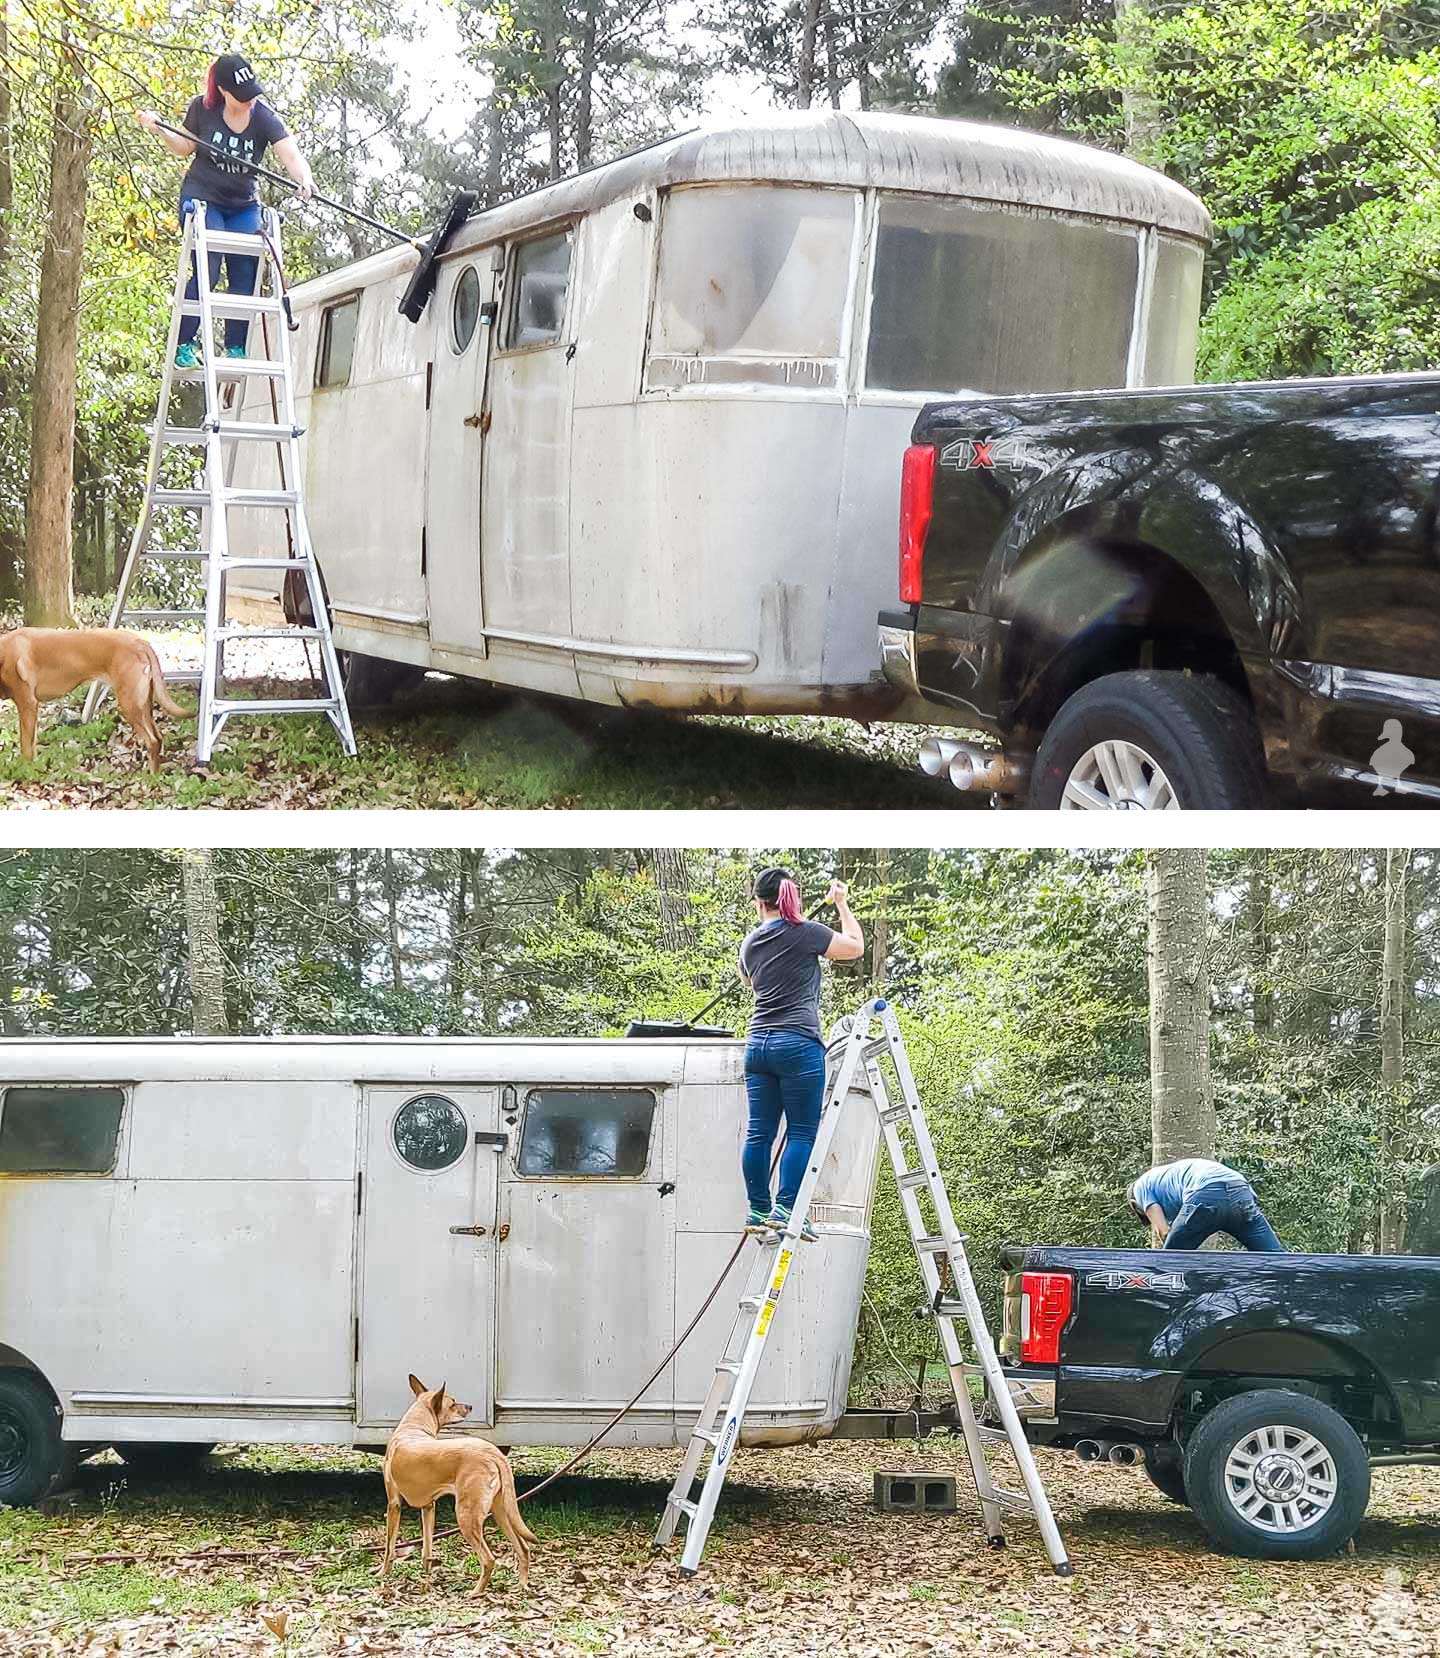 Rubys-Revival-scrubbing-the-roof-of-the-trailer